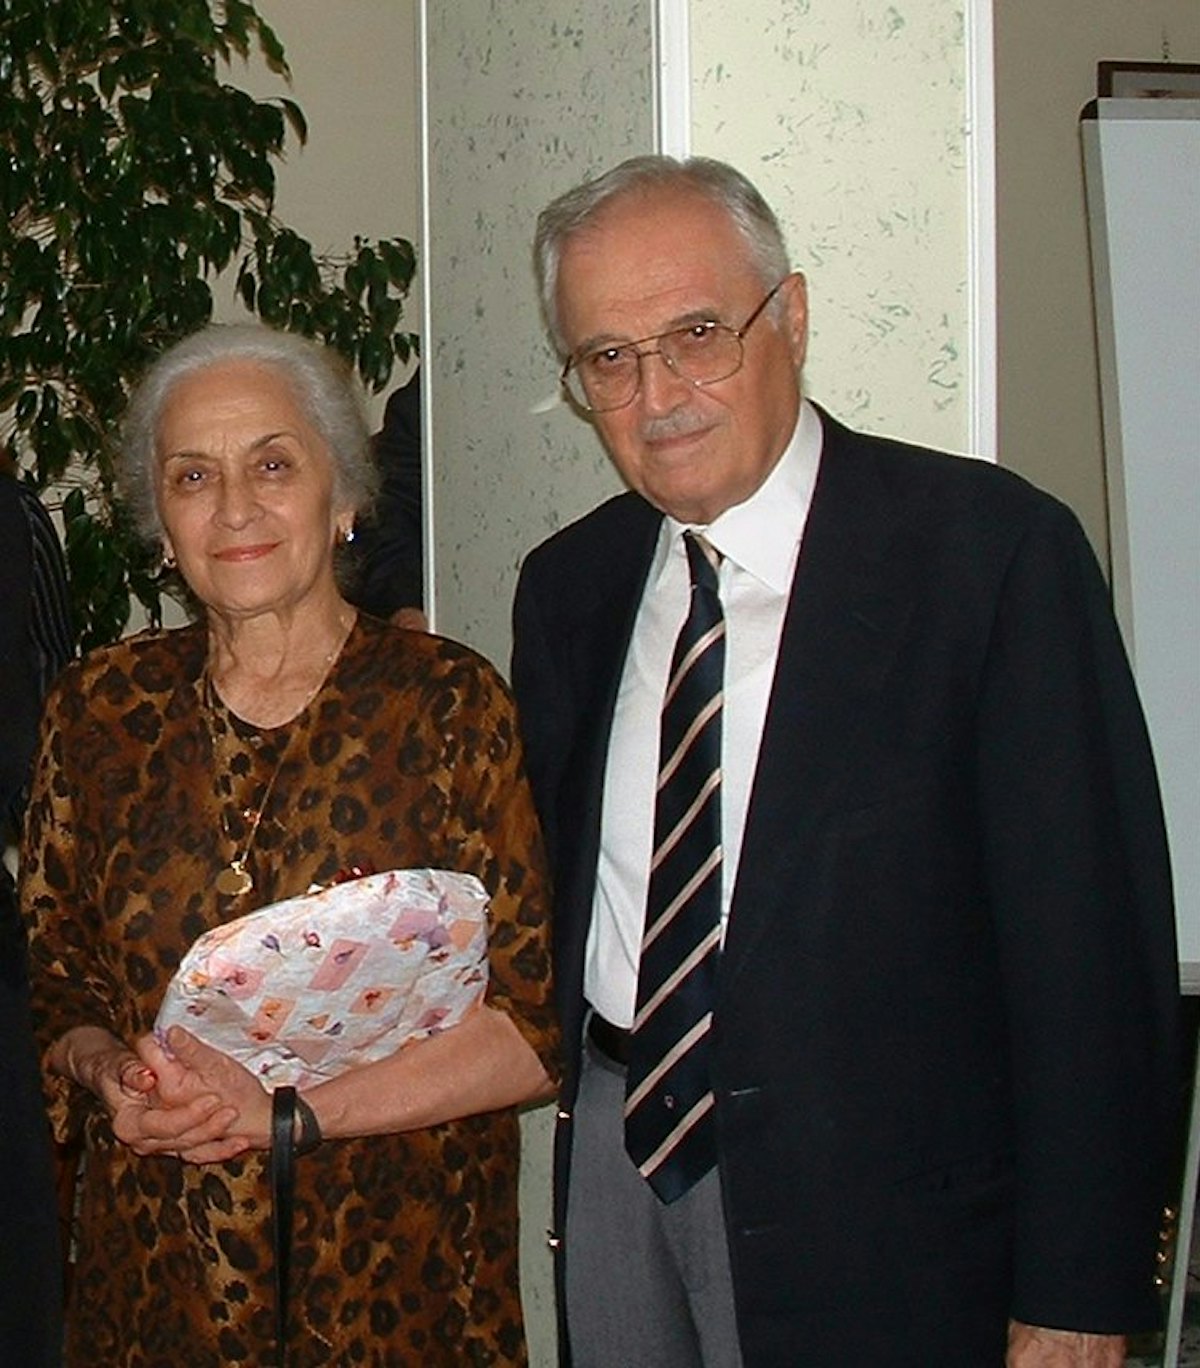 Mr. Ali Nakhjavani and his wife, Violette, at the jubilee.